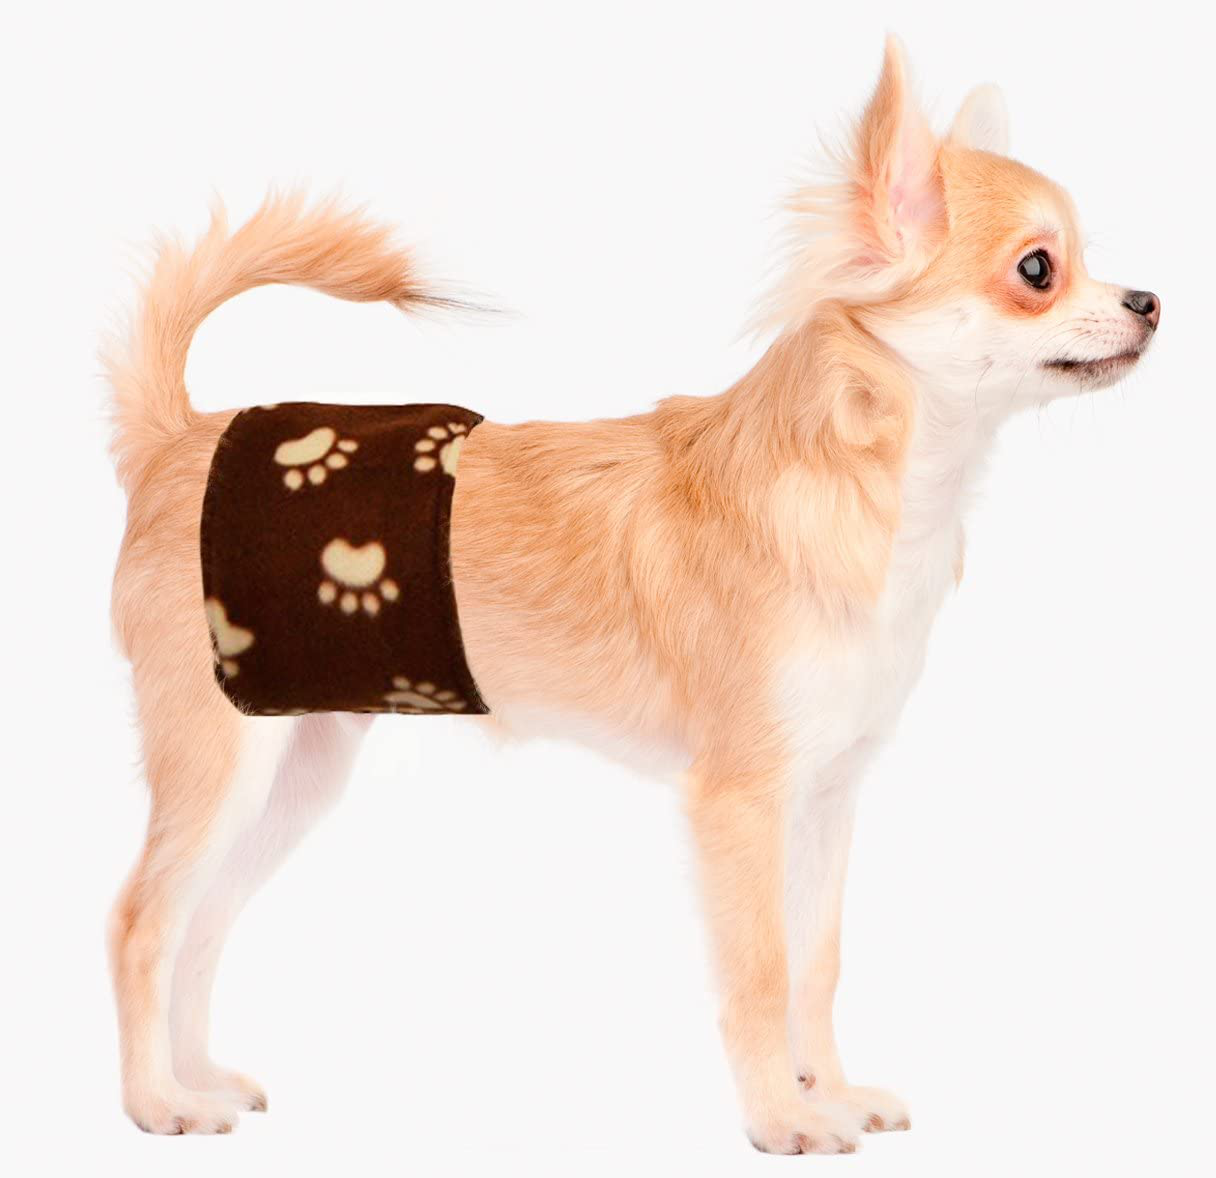 Cuddle Bands Male Dog Belly Band for Housetraining and Incontinence - Washable and Reusable Dog Diaper (Brown Paw Print)